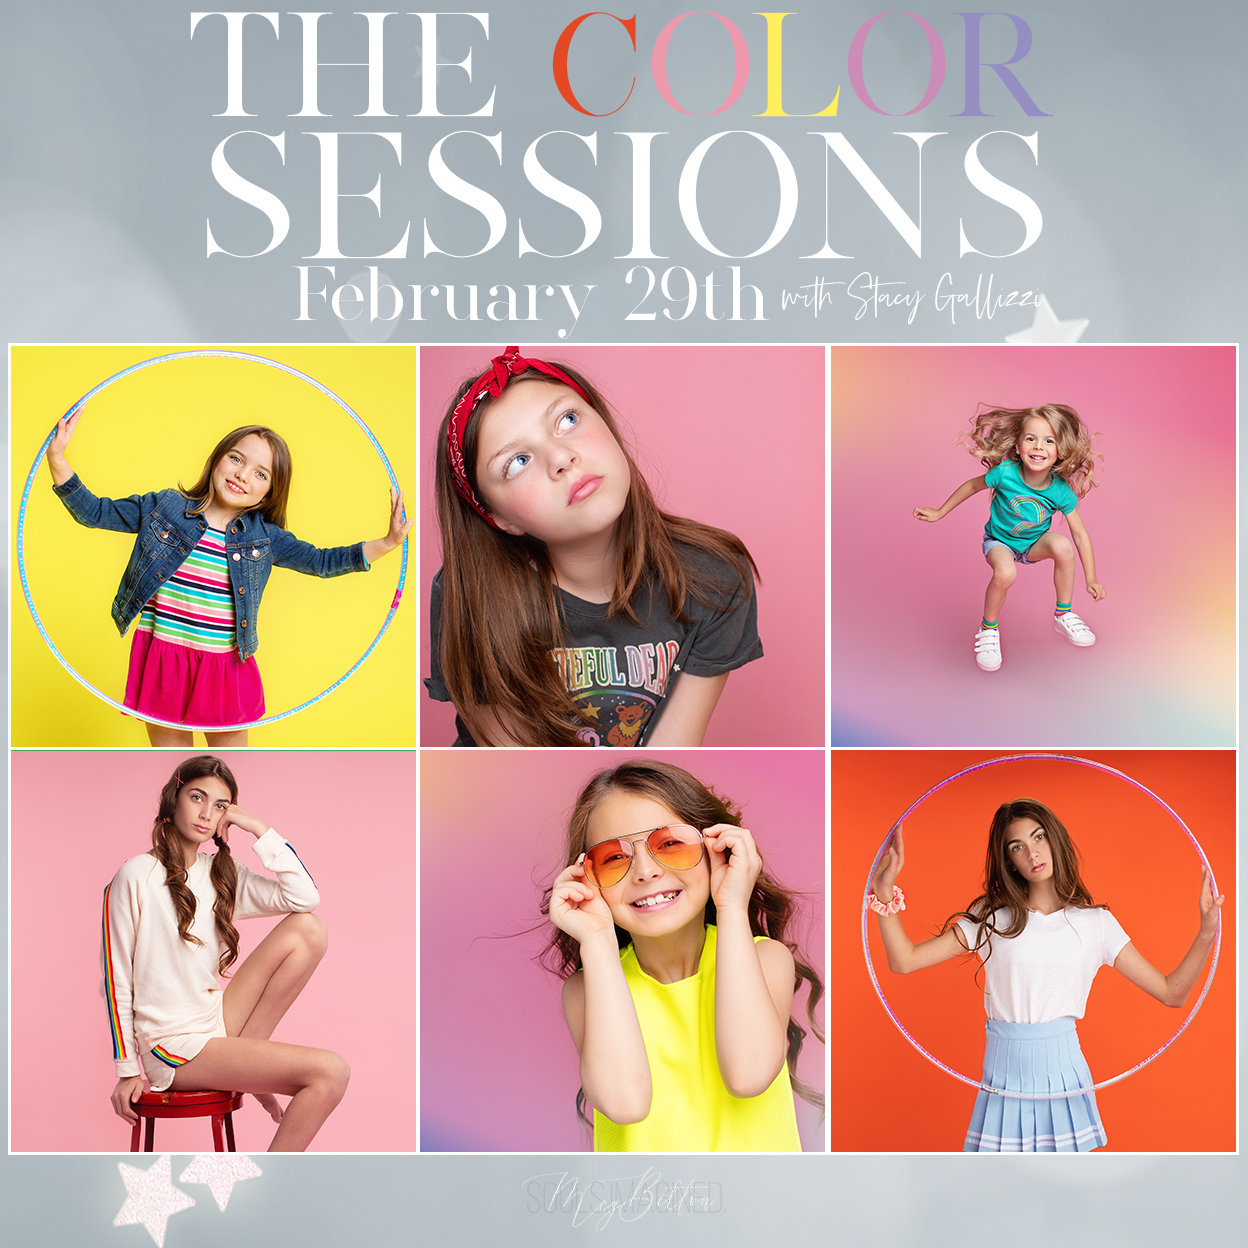 The Color Sessions with Stacy Gallizzi February 29th 2020 - Meg Bitton Productions